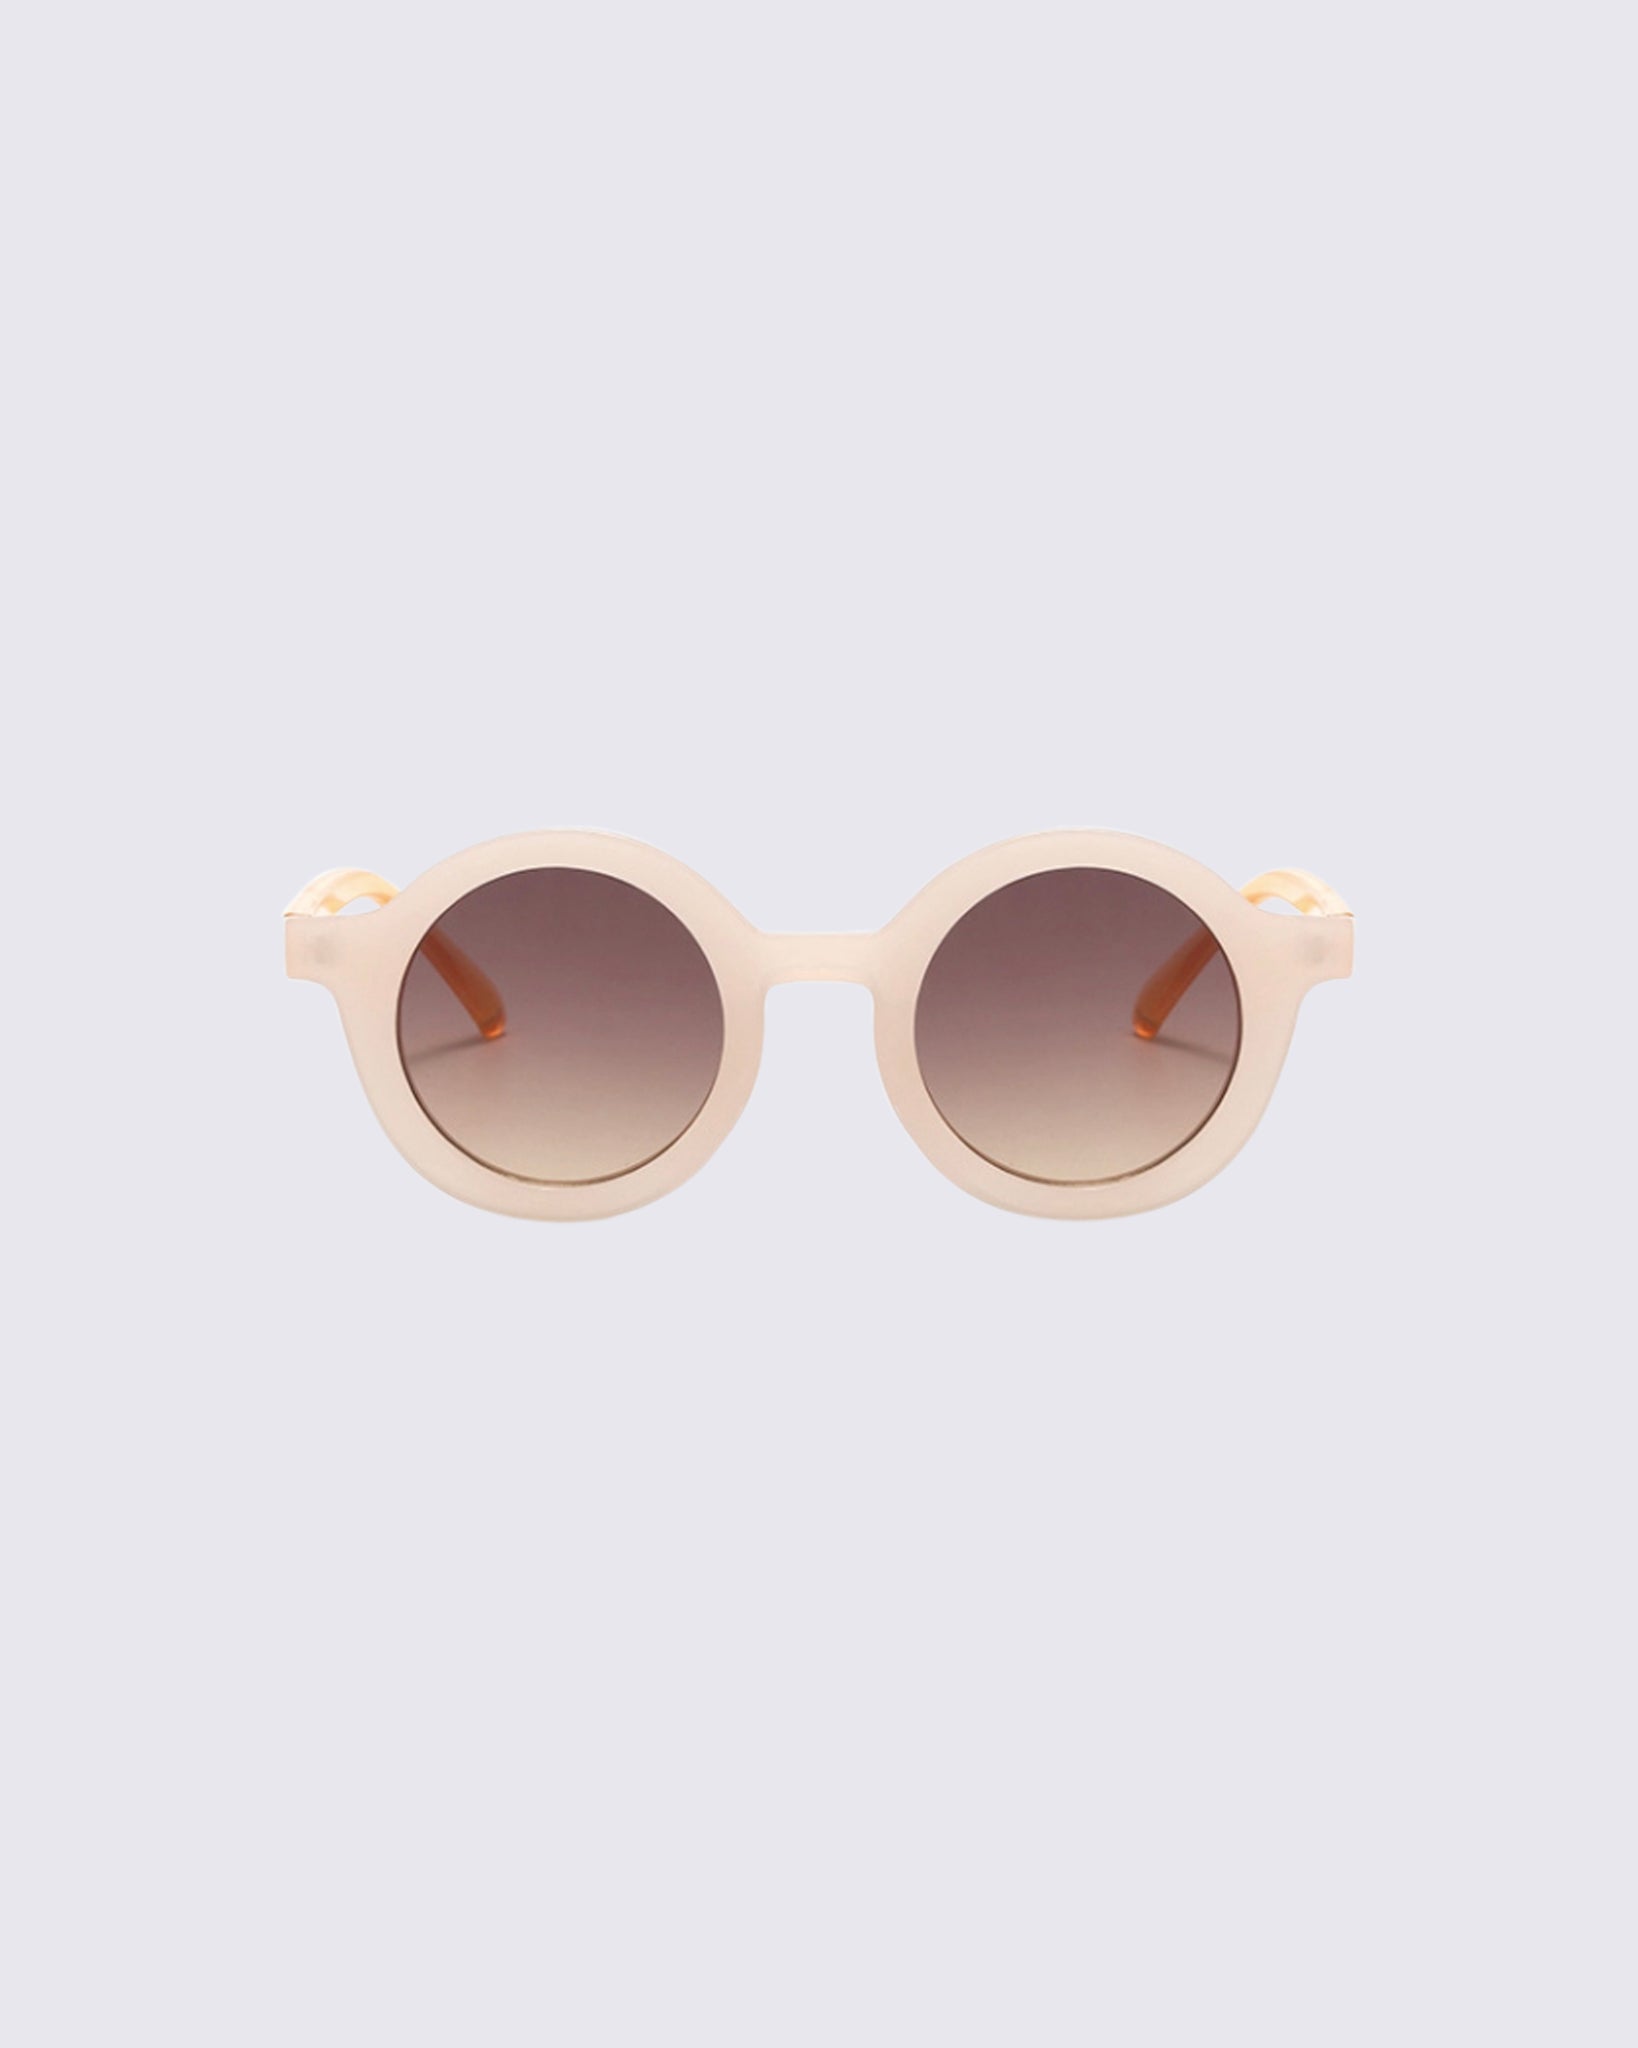 Hollows Shades - Champagne Pink